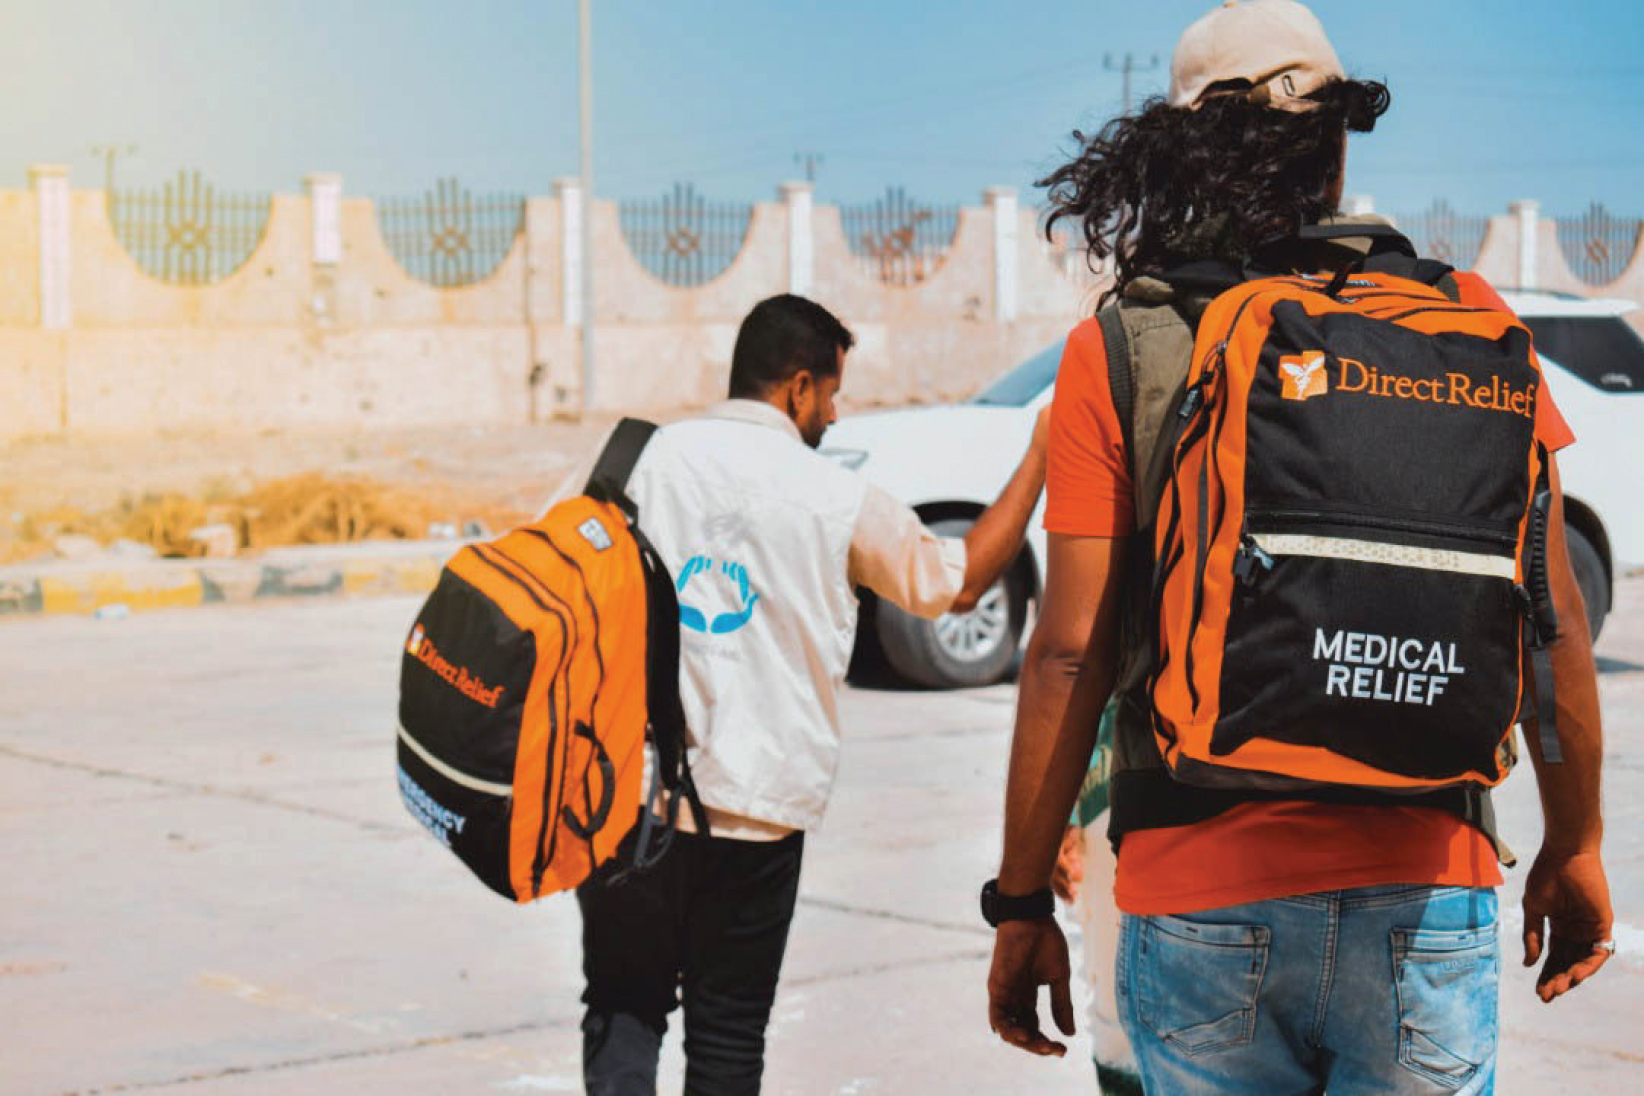 Two men with their back to the camera with orange and black Direct Relief backpacks on